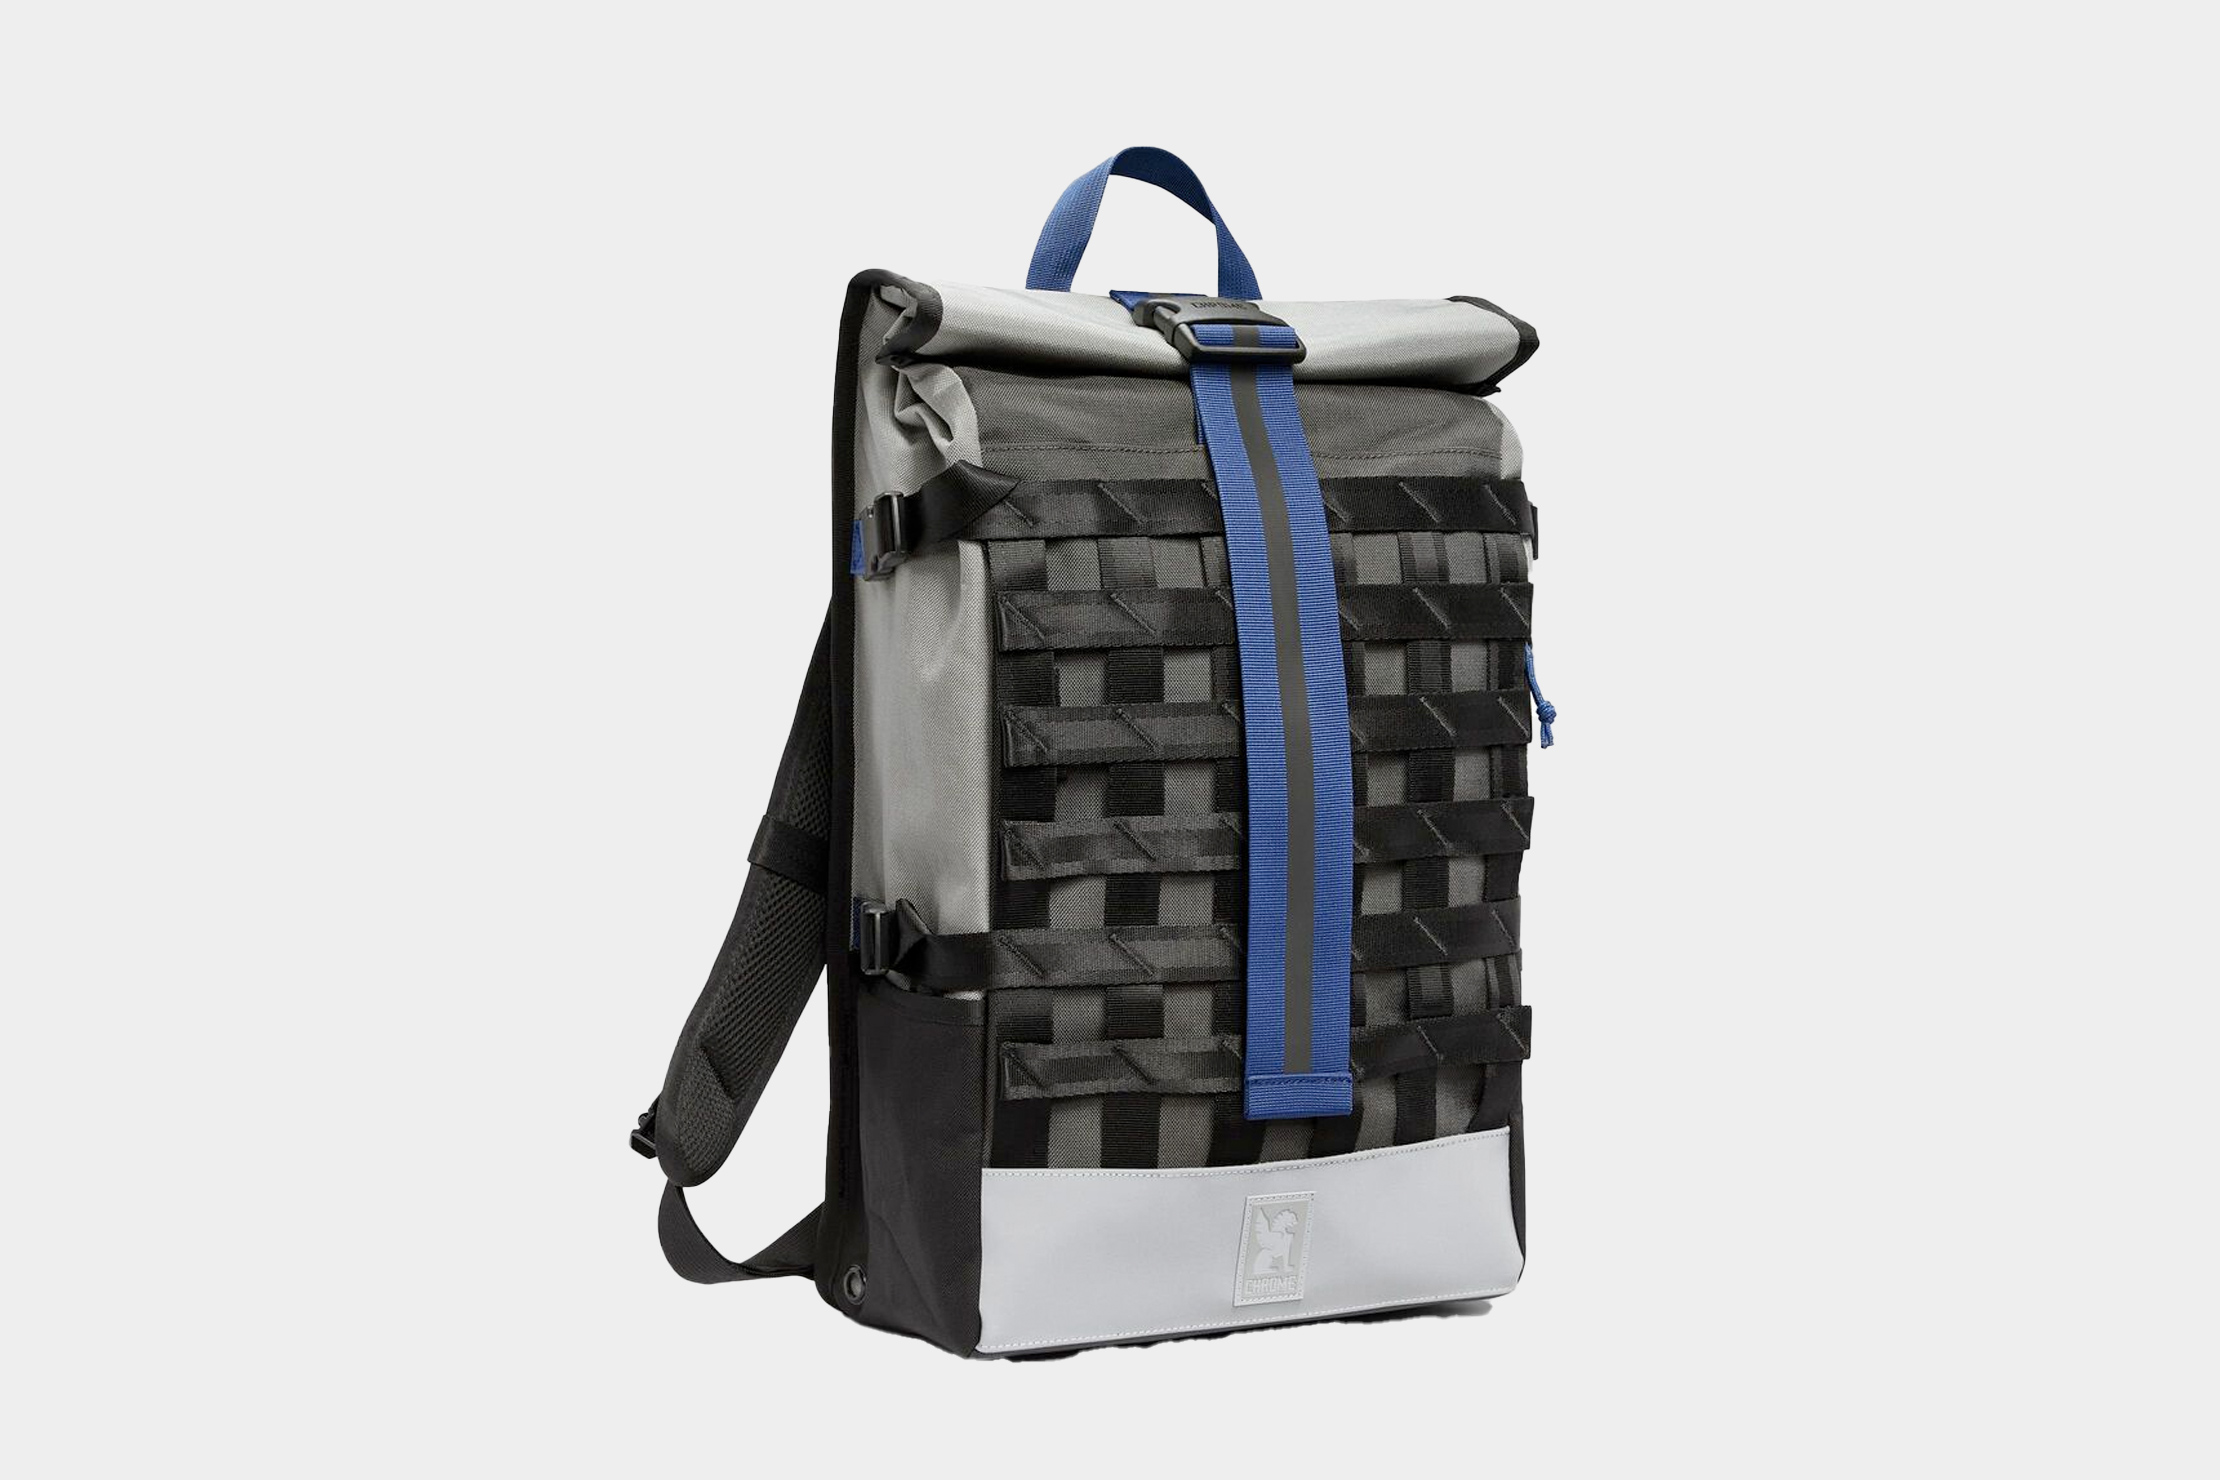 Chrome Delta Backpack - Accessories